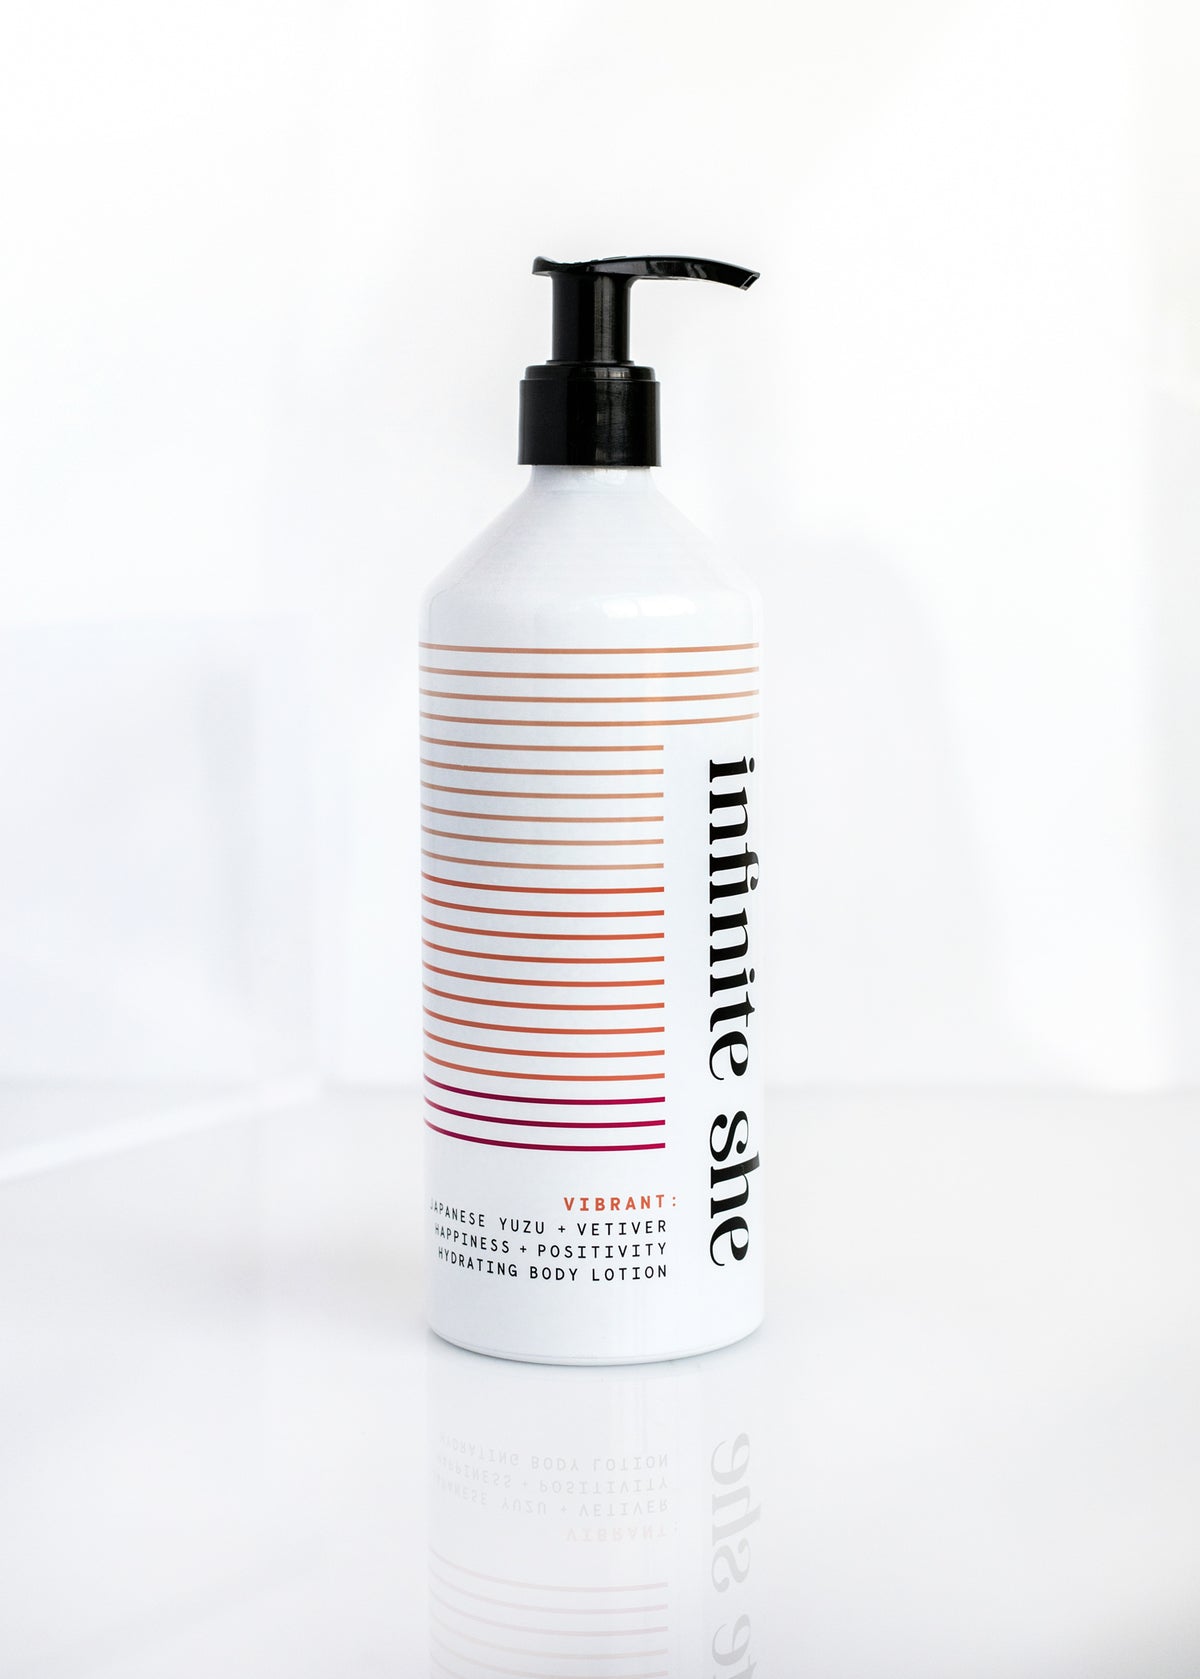 A white bottle of Margot Elena's 'Infinite She Vibrant Hydrating Body Lotion' with argan oil, featuring a colorful horizontal striped design with a black pump, on a clean white background.